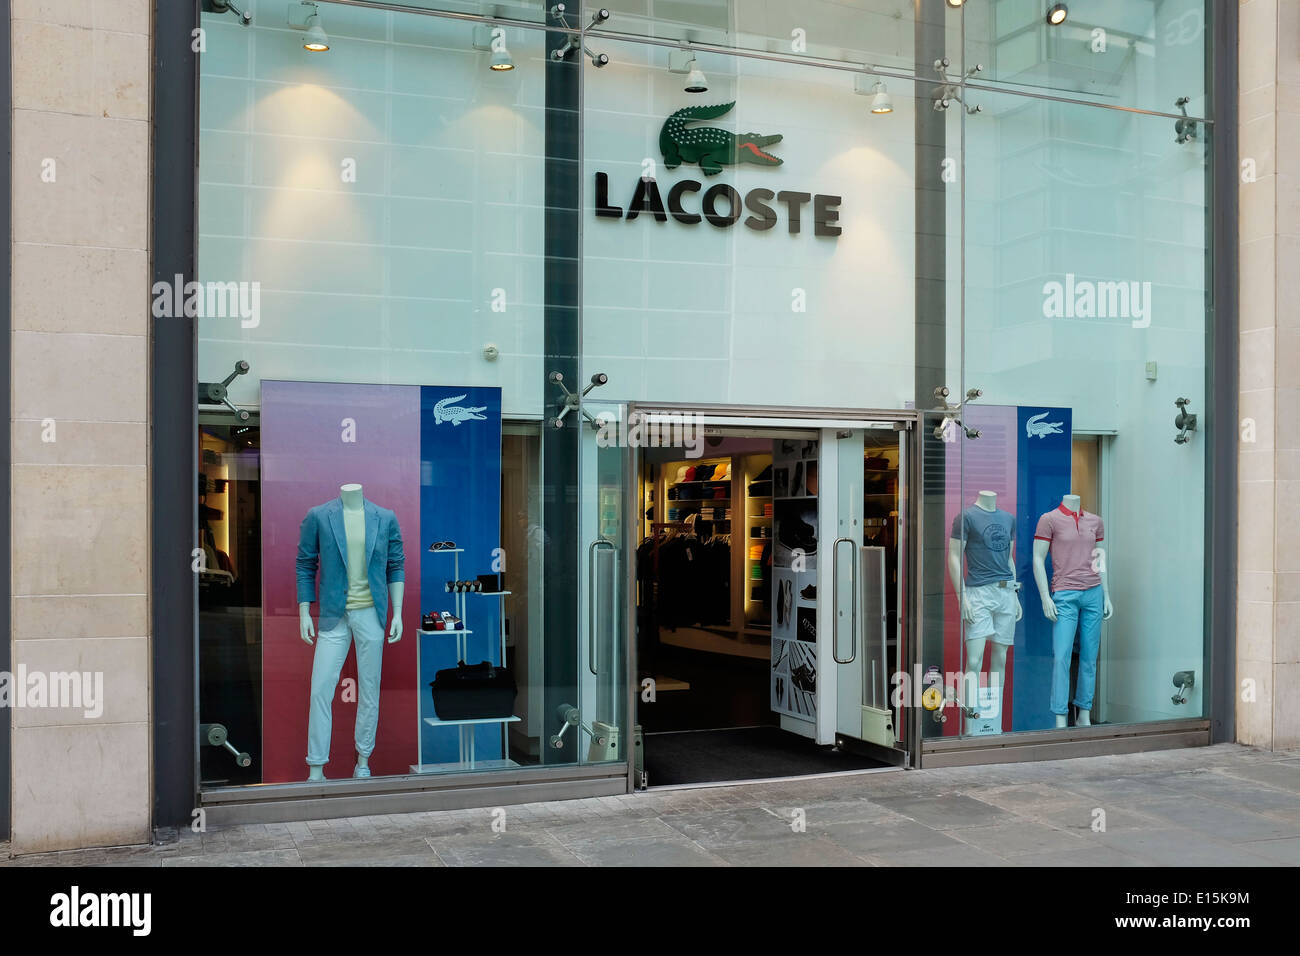 Lacoste store front in Manchester city centre UK Stock Photo - Alamy